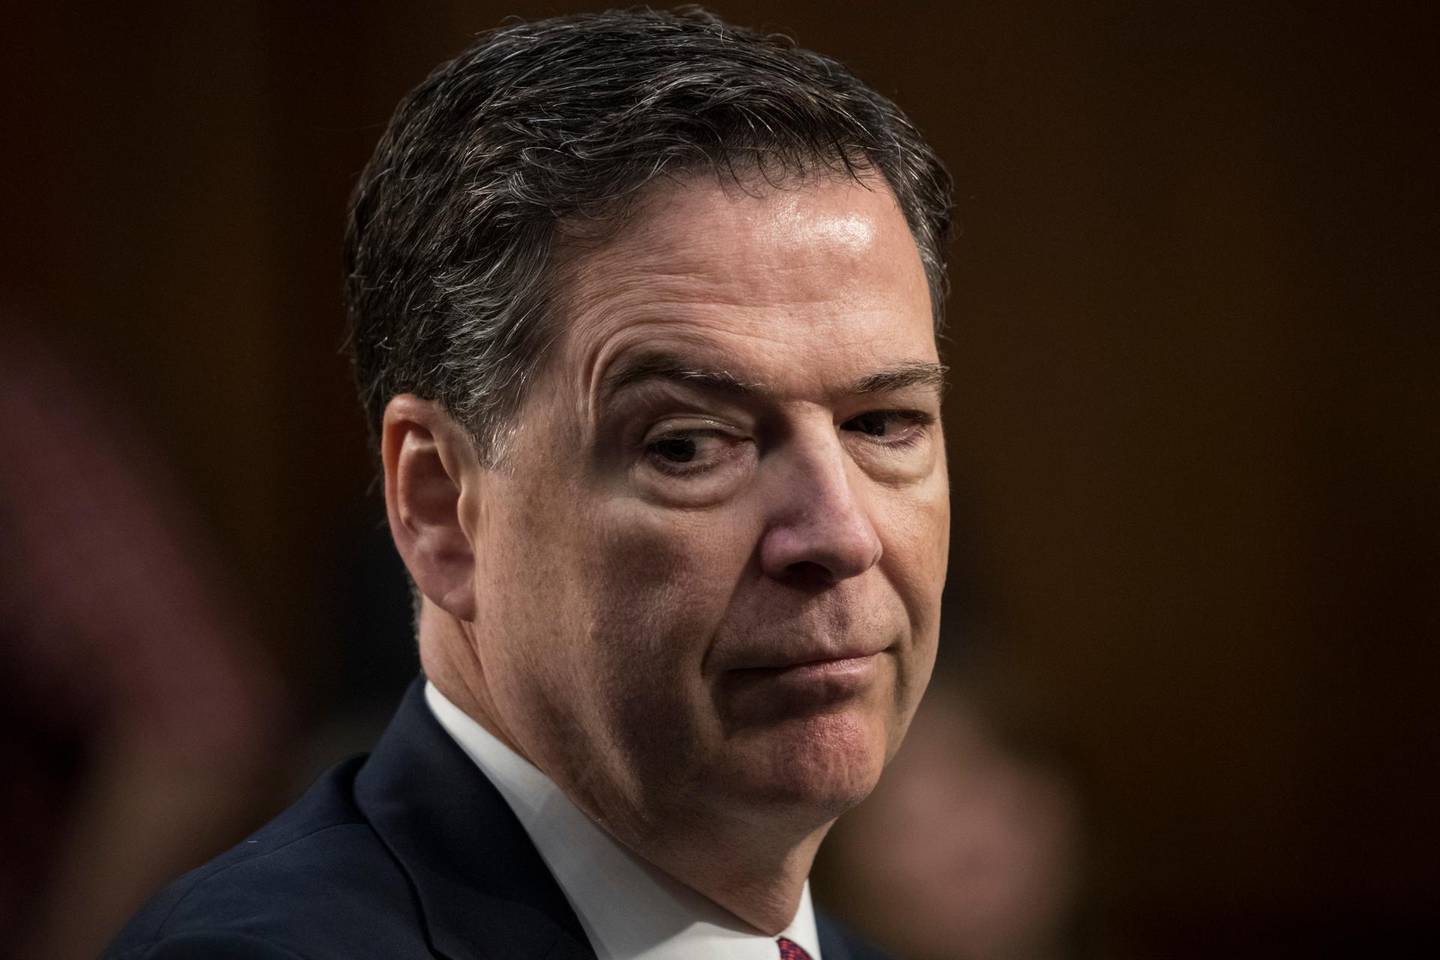 In this file photo, June 8, 2017, file photo, fired FBI director James Comey testifies before the Senate Select Committee on Intelligence, on Capitol Hill in Washington. The Justice Department's watchdog faults former Comey for breaking with protocol in his handling of the Hillary Clinton email investigation. But it says his decisions were not driven by political bias ahead of the 2016 election.(AP Photo/J. Scott Applewhite, File)